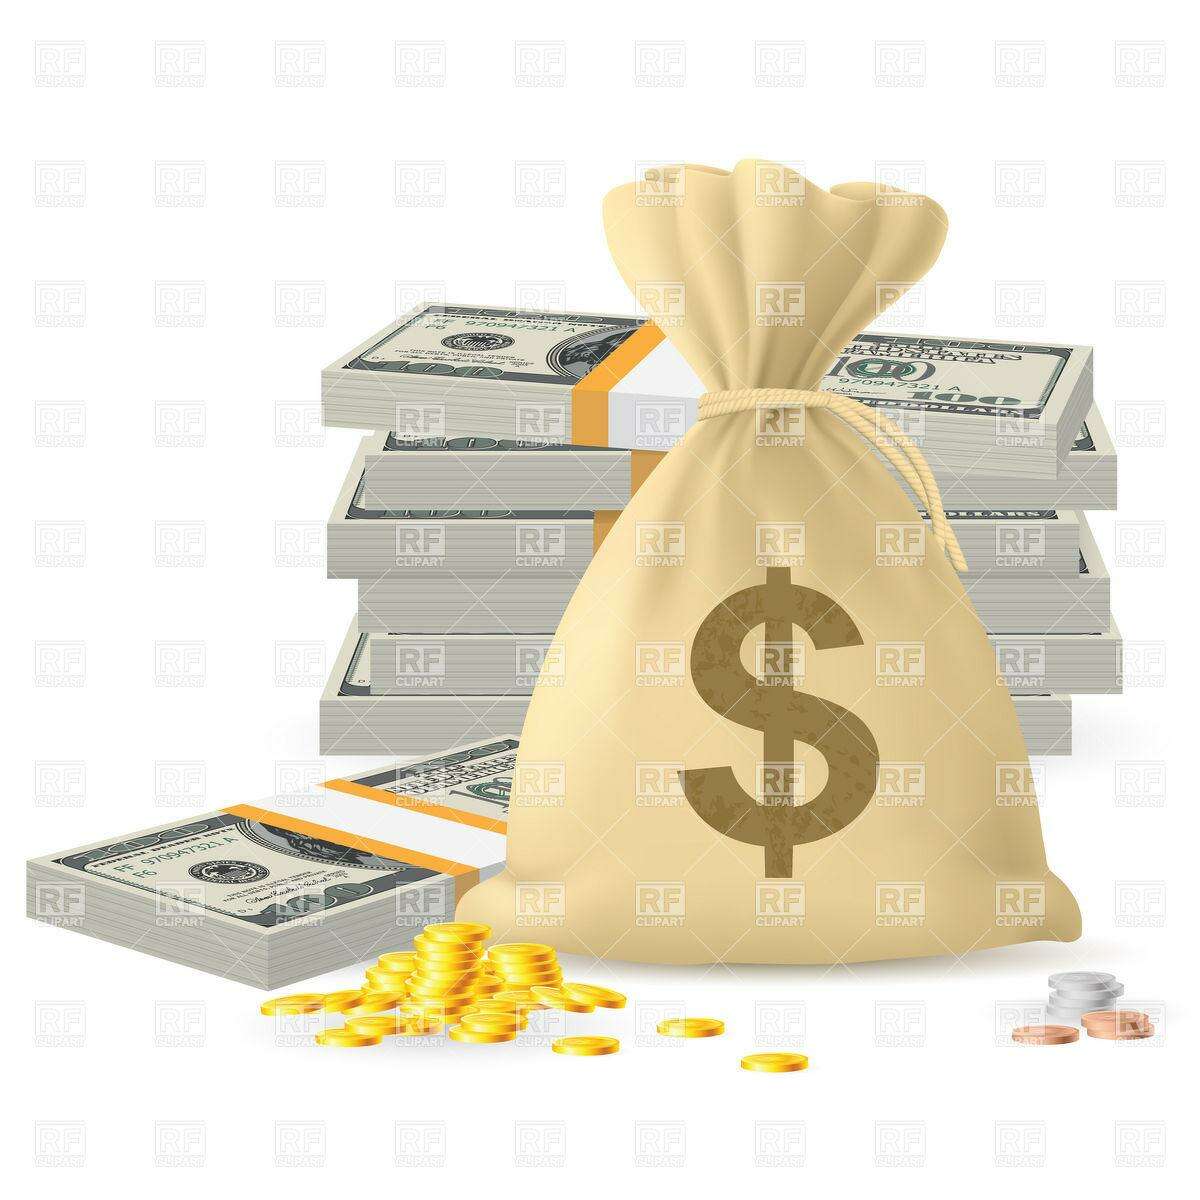 Piles of money in the form of Cash and Gold coins, with Money sack